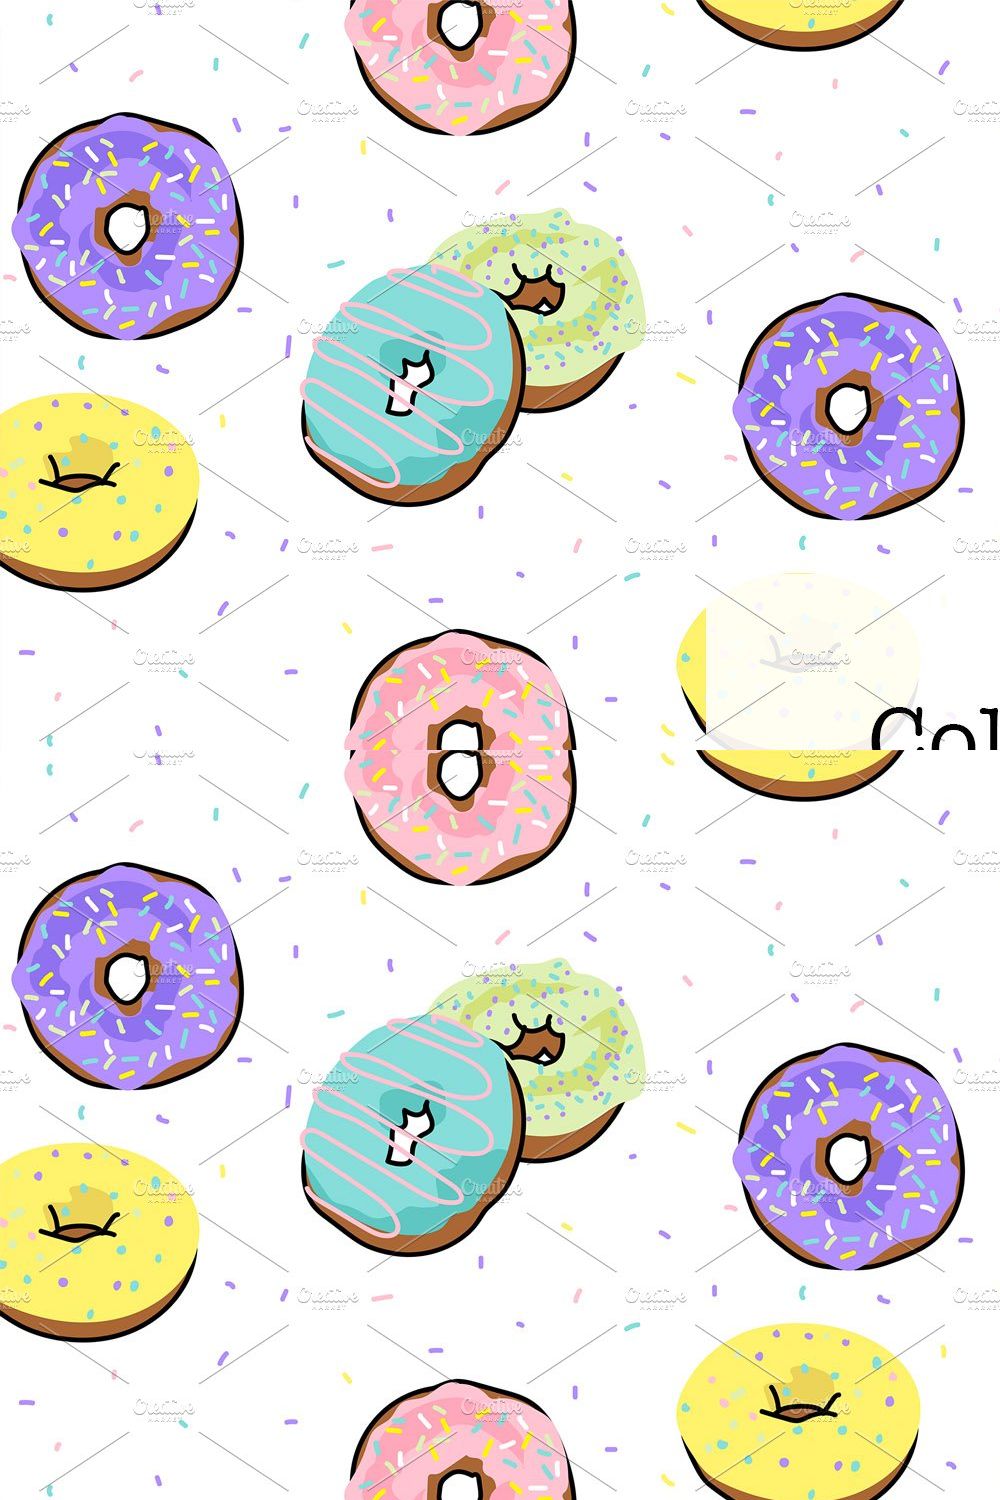 Colorful sweets patterns pinterest preview image.